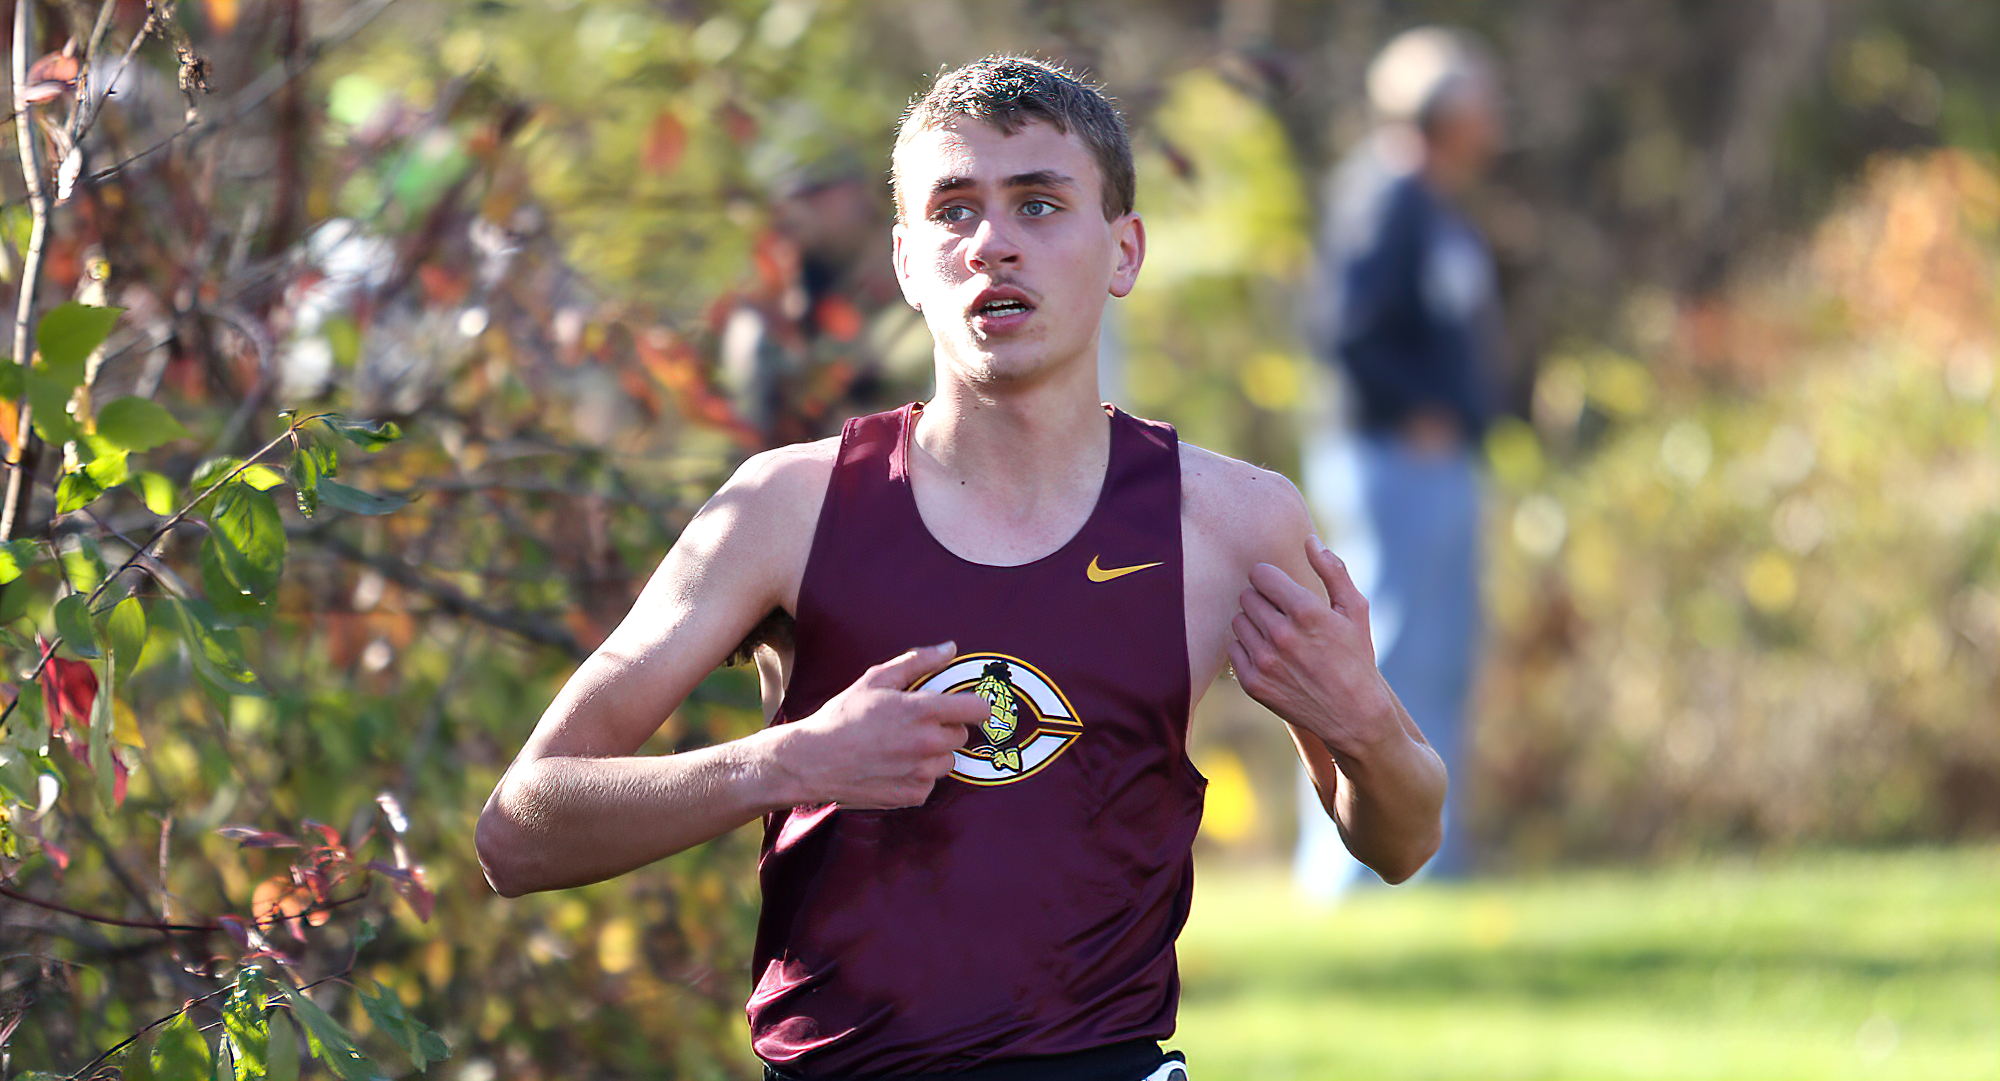 Senior Leo Smith led the Cobbers at the season-opening meet as he finished third in the dual against St. John’s at the Boulder Ridge GC.